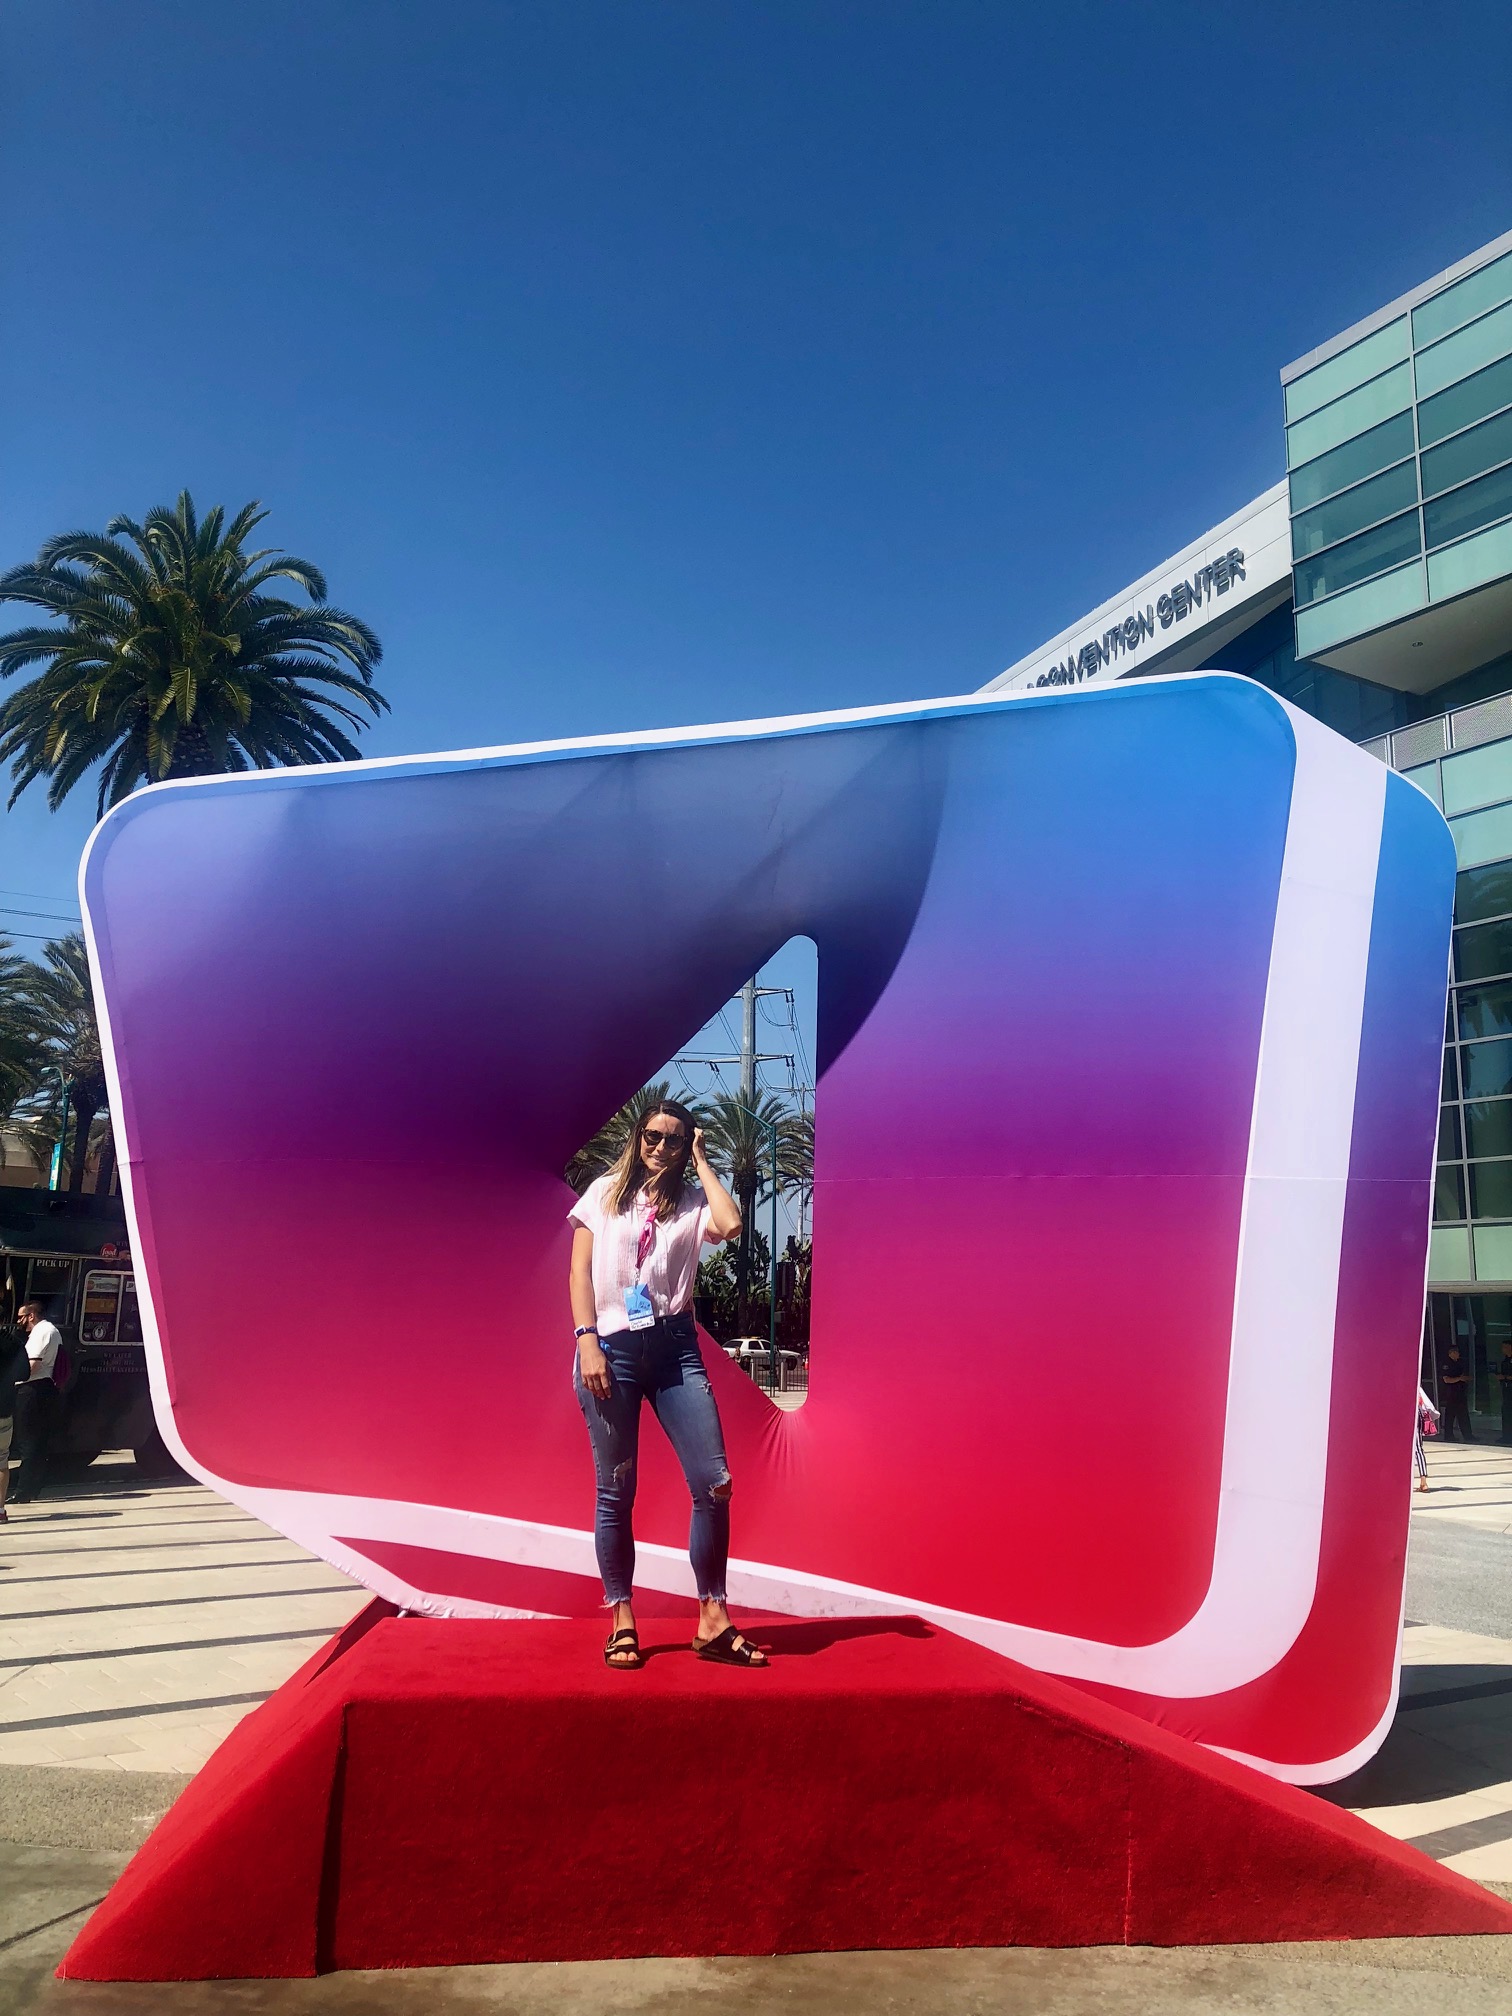 How to improve your social media / What I learned at Vidcon